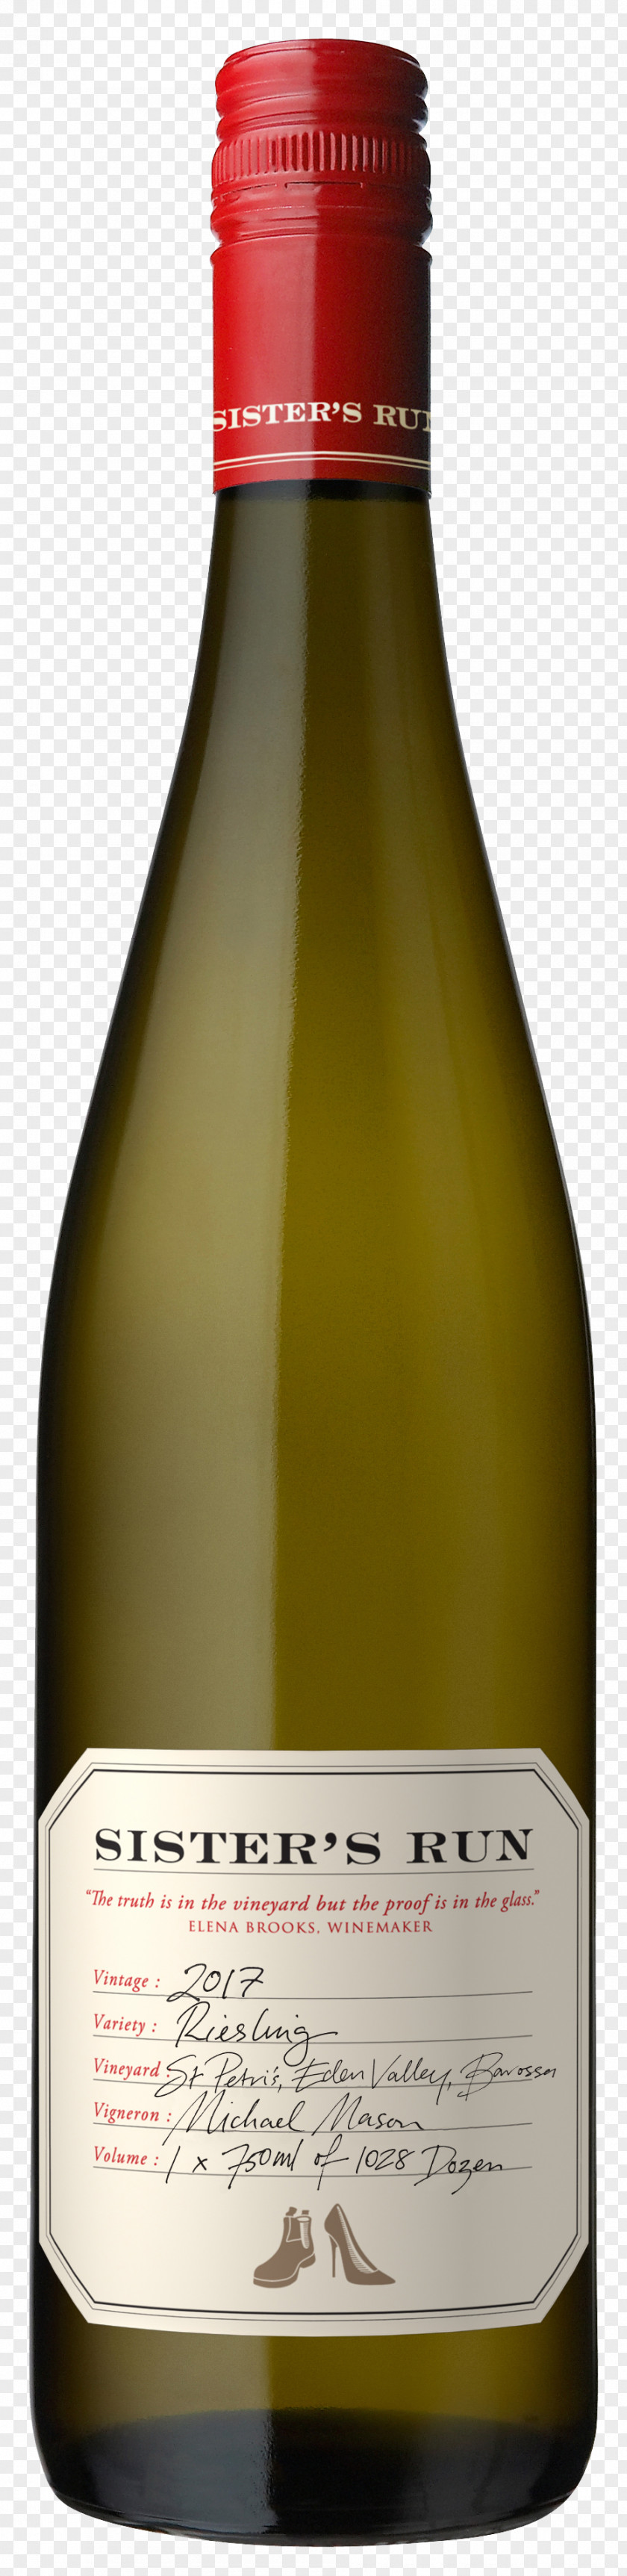 Champagne Eden Valley Riesling White Wine PNG